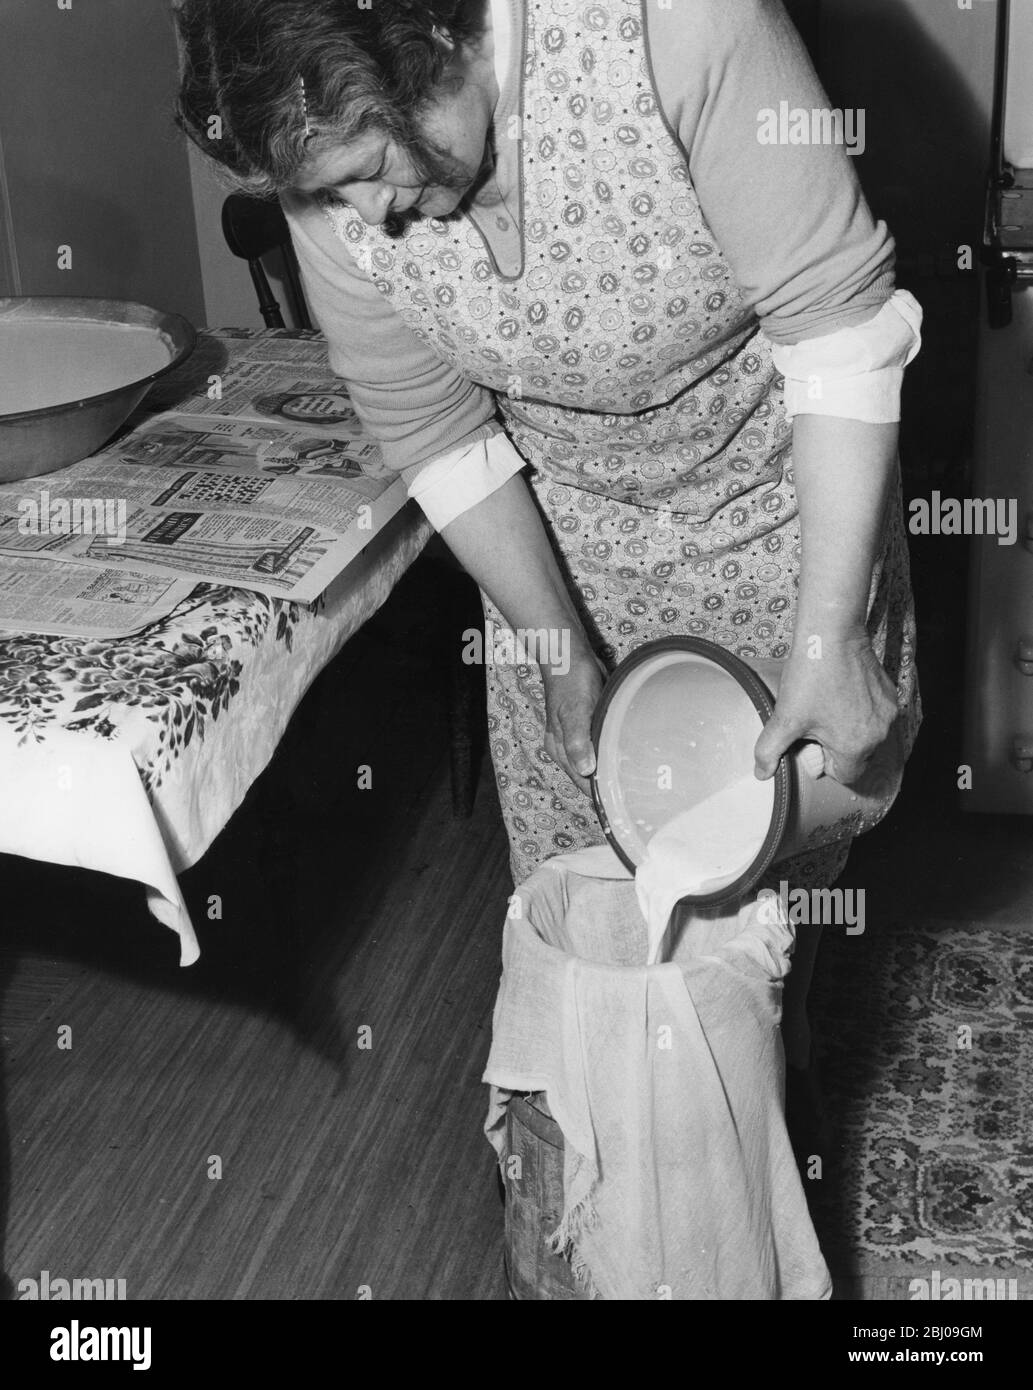 Miss Peggy Macleod making butter pouring the milk through muslin into a churn in Daliburgh South Uist Outer Hebridges Scotland - September 1961 Stock Photo